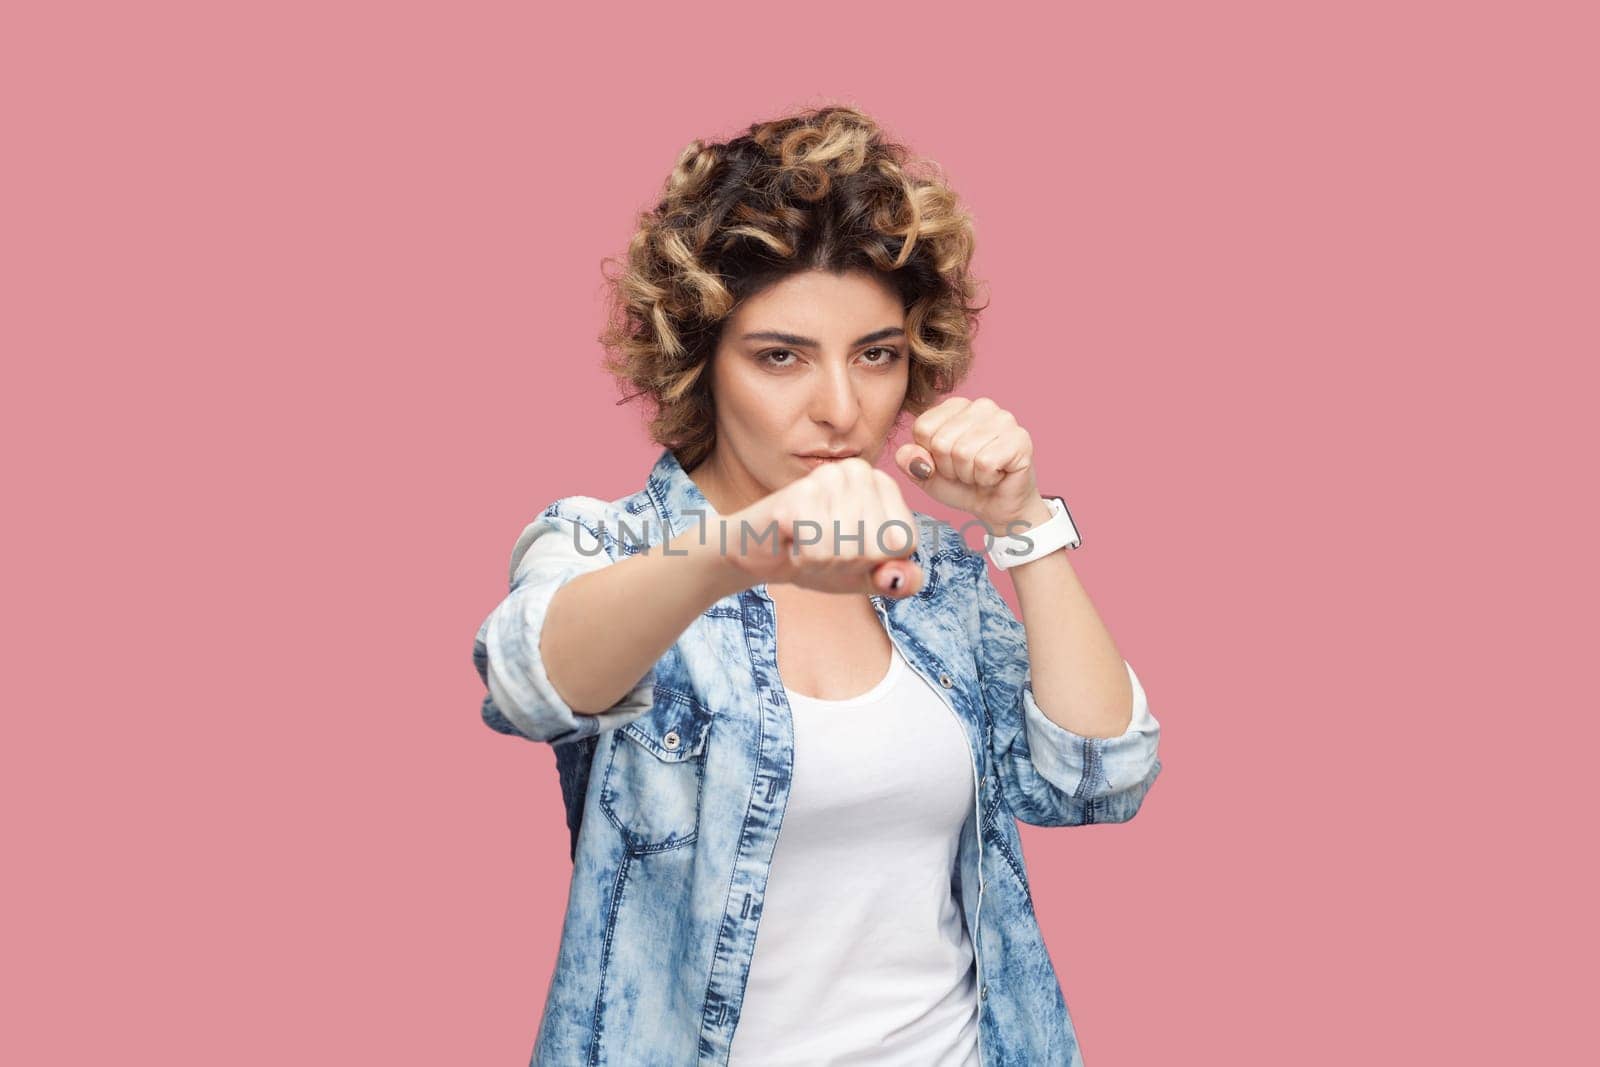 Portrait of angry aggressive woman with curly hairstyle wearing blue shirt standing with clenched fist, boxing, knocks somebody. Indoor studio shot isolated on pink background.